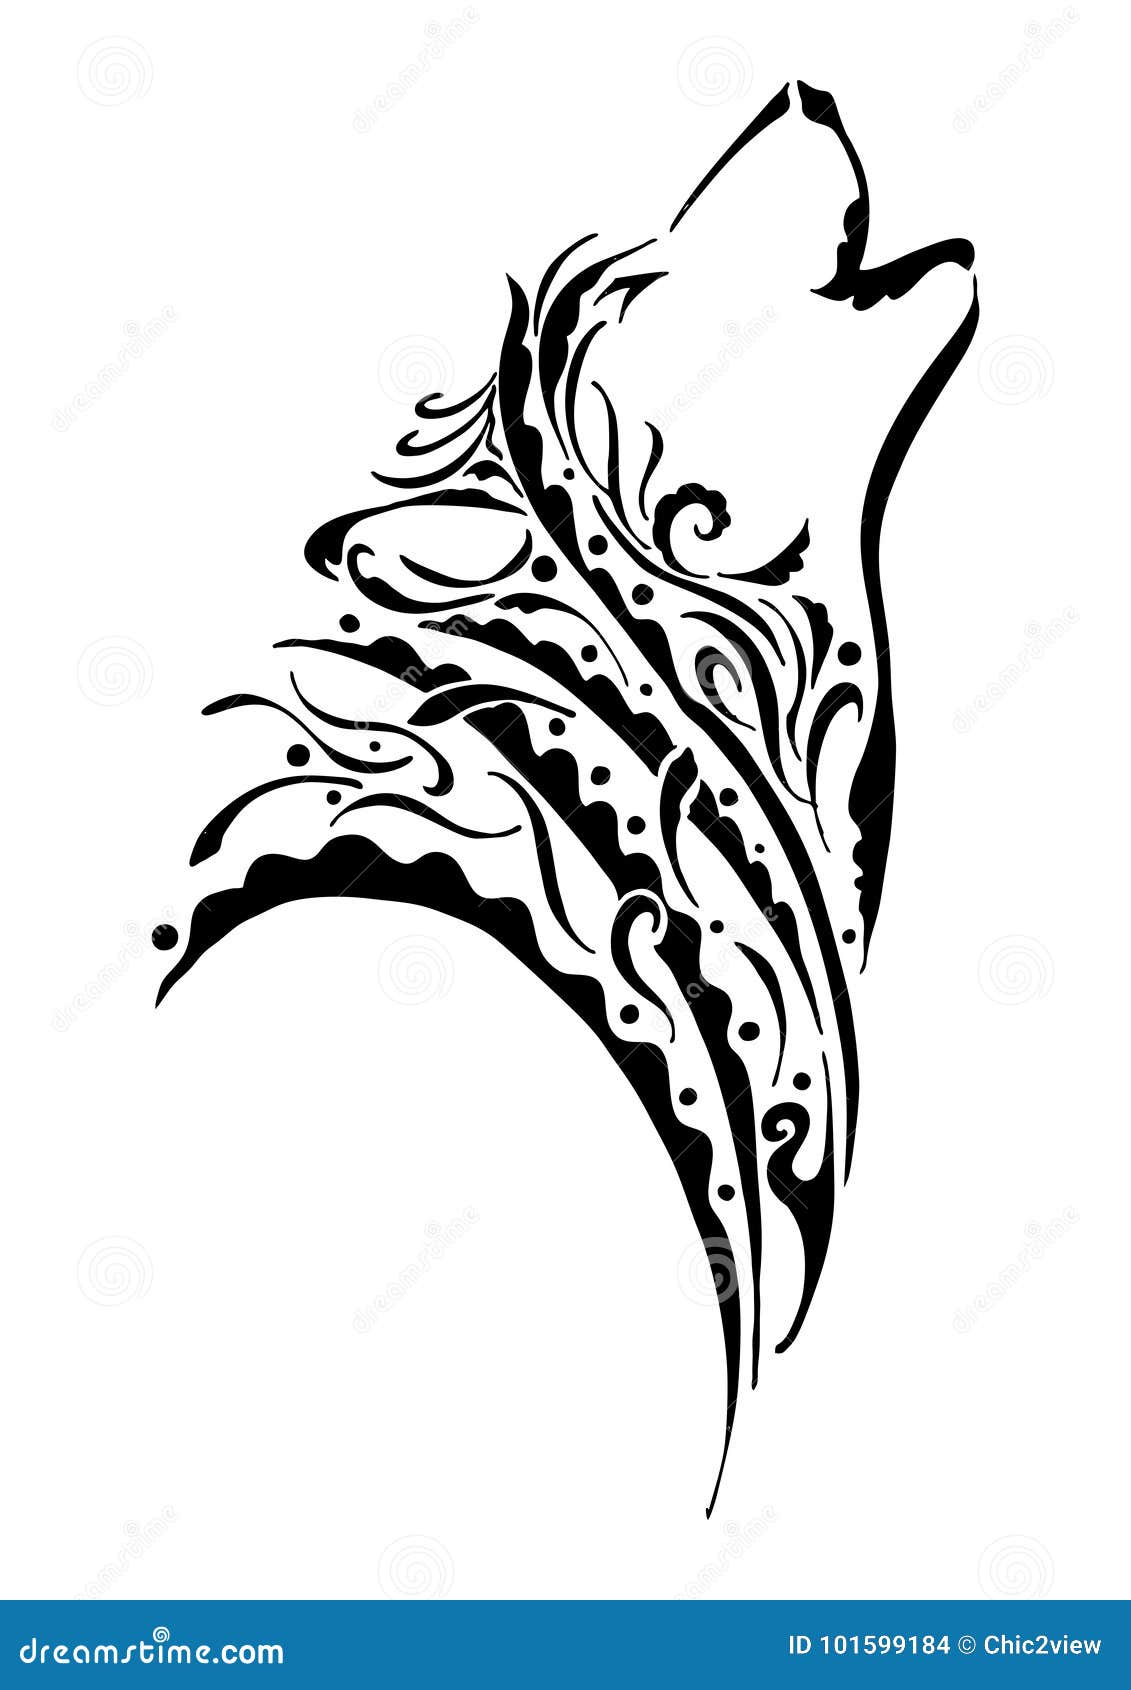 Black Silhouette Wolf Head Howling Tribal Tattoo with Wind Element or Air  Element Concept Design Stock Illustration - Illustration of design, hunter:  101599184